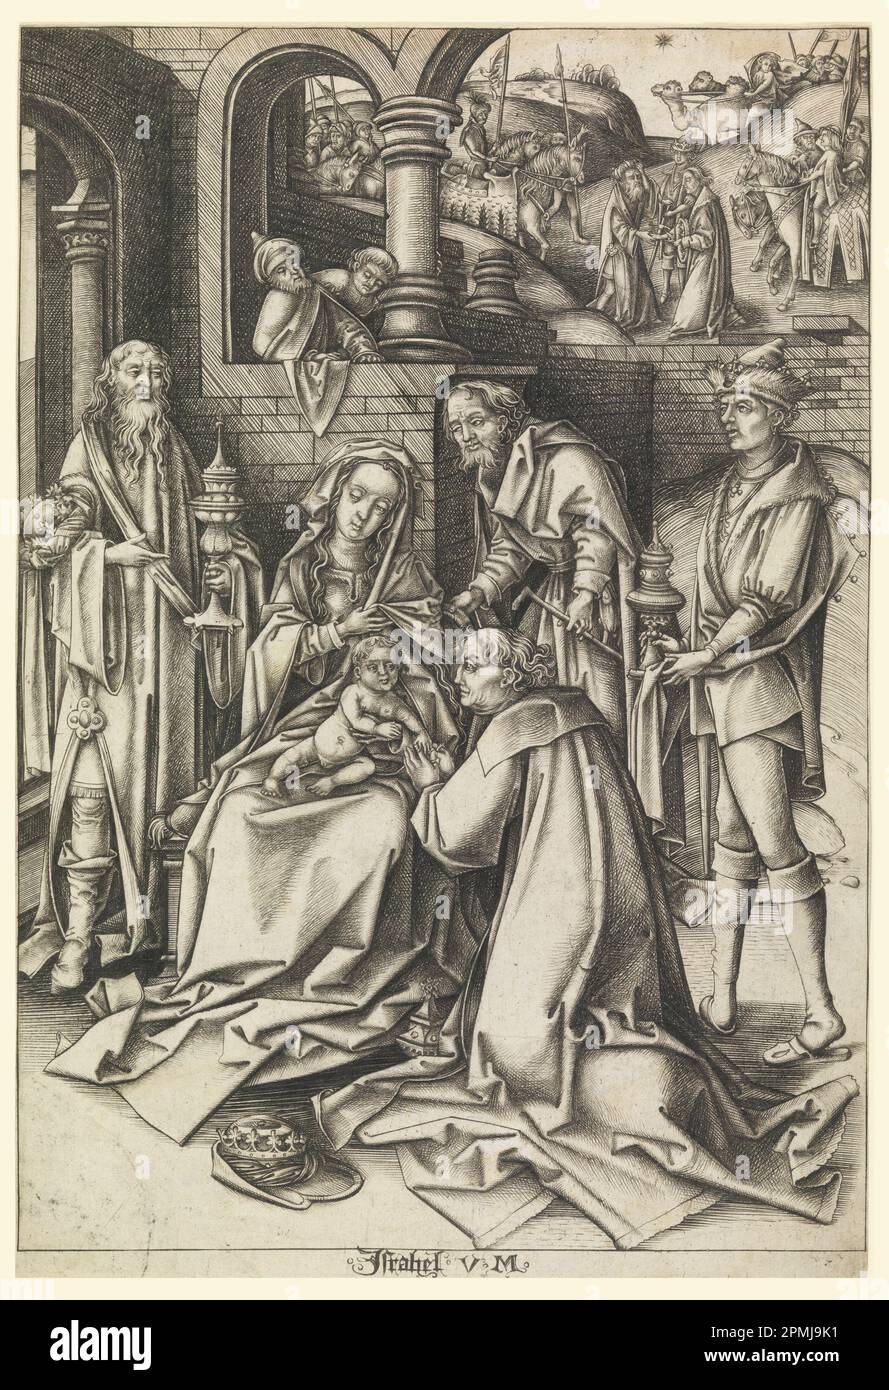 Print, Adoration of Magi, plate 7 from series 'Life of the Virgin'; Israhel van Meckenem (German, ca. 1440 - 1503); After Hans Holbein the Younger (1497/98 – 1543); Germany; engraving on a white paper; 26.7 x 18.1 cm (10 1/2 x 7 1/8 in.); 1958-122-6 Stock Photo